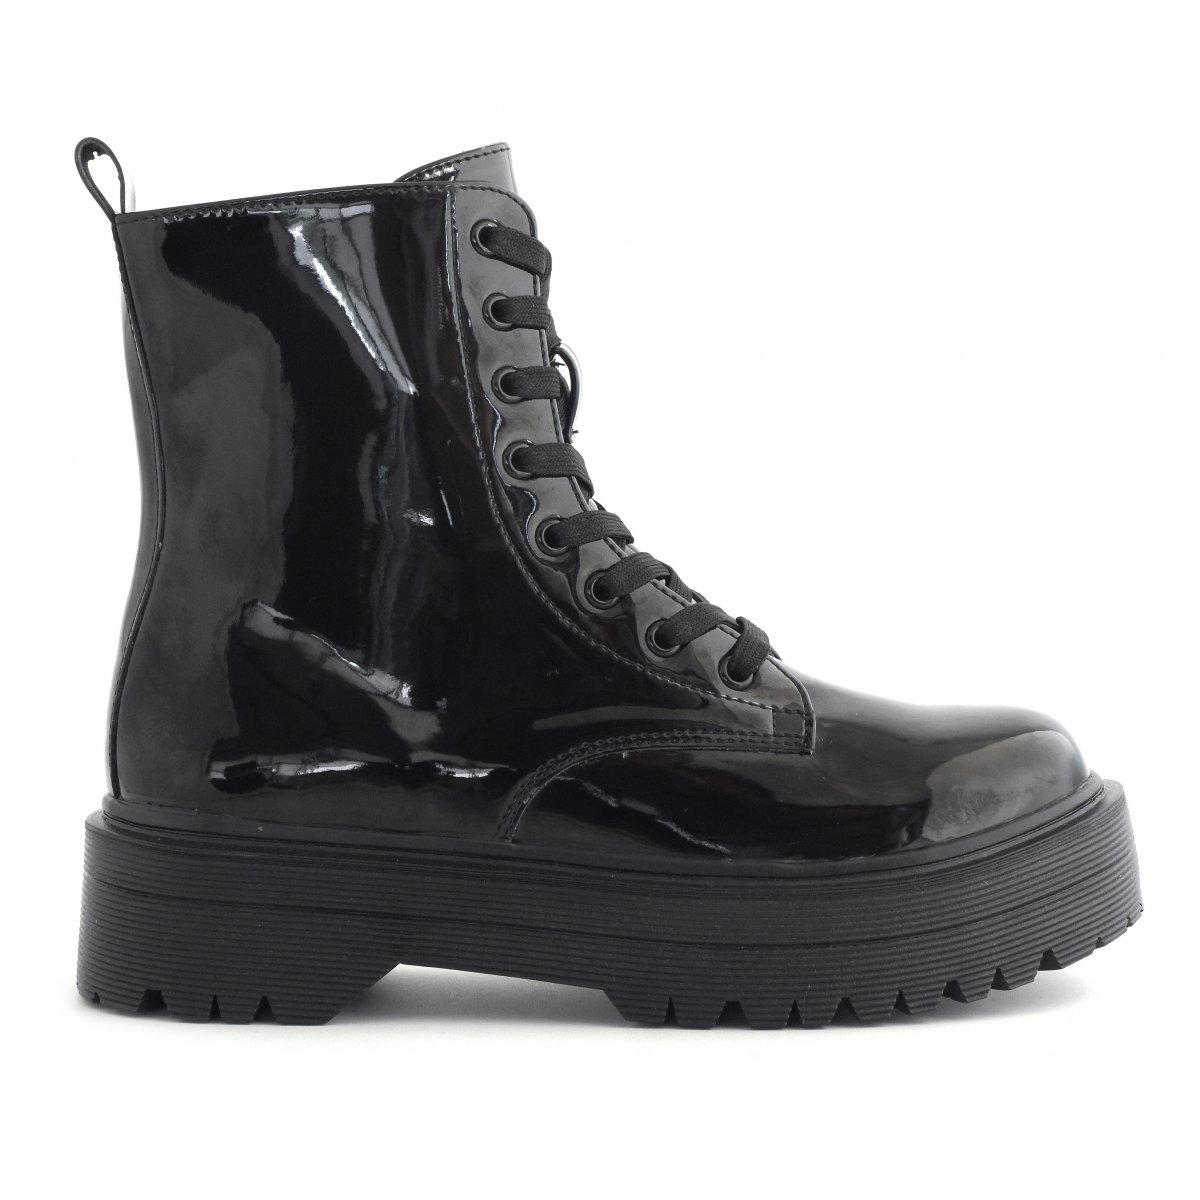 Glossy boot with inner zip - Boots Woman Colors of California Women